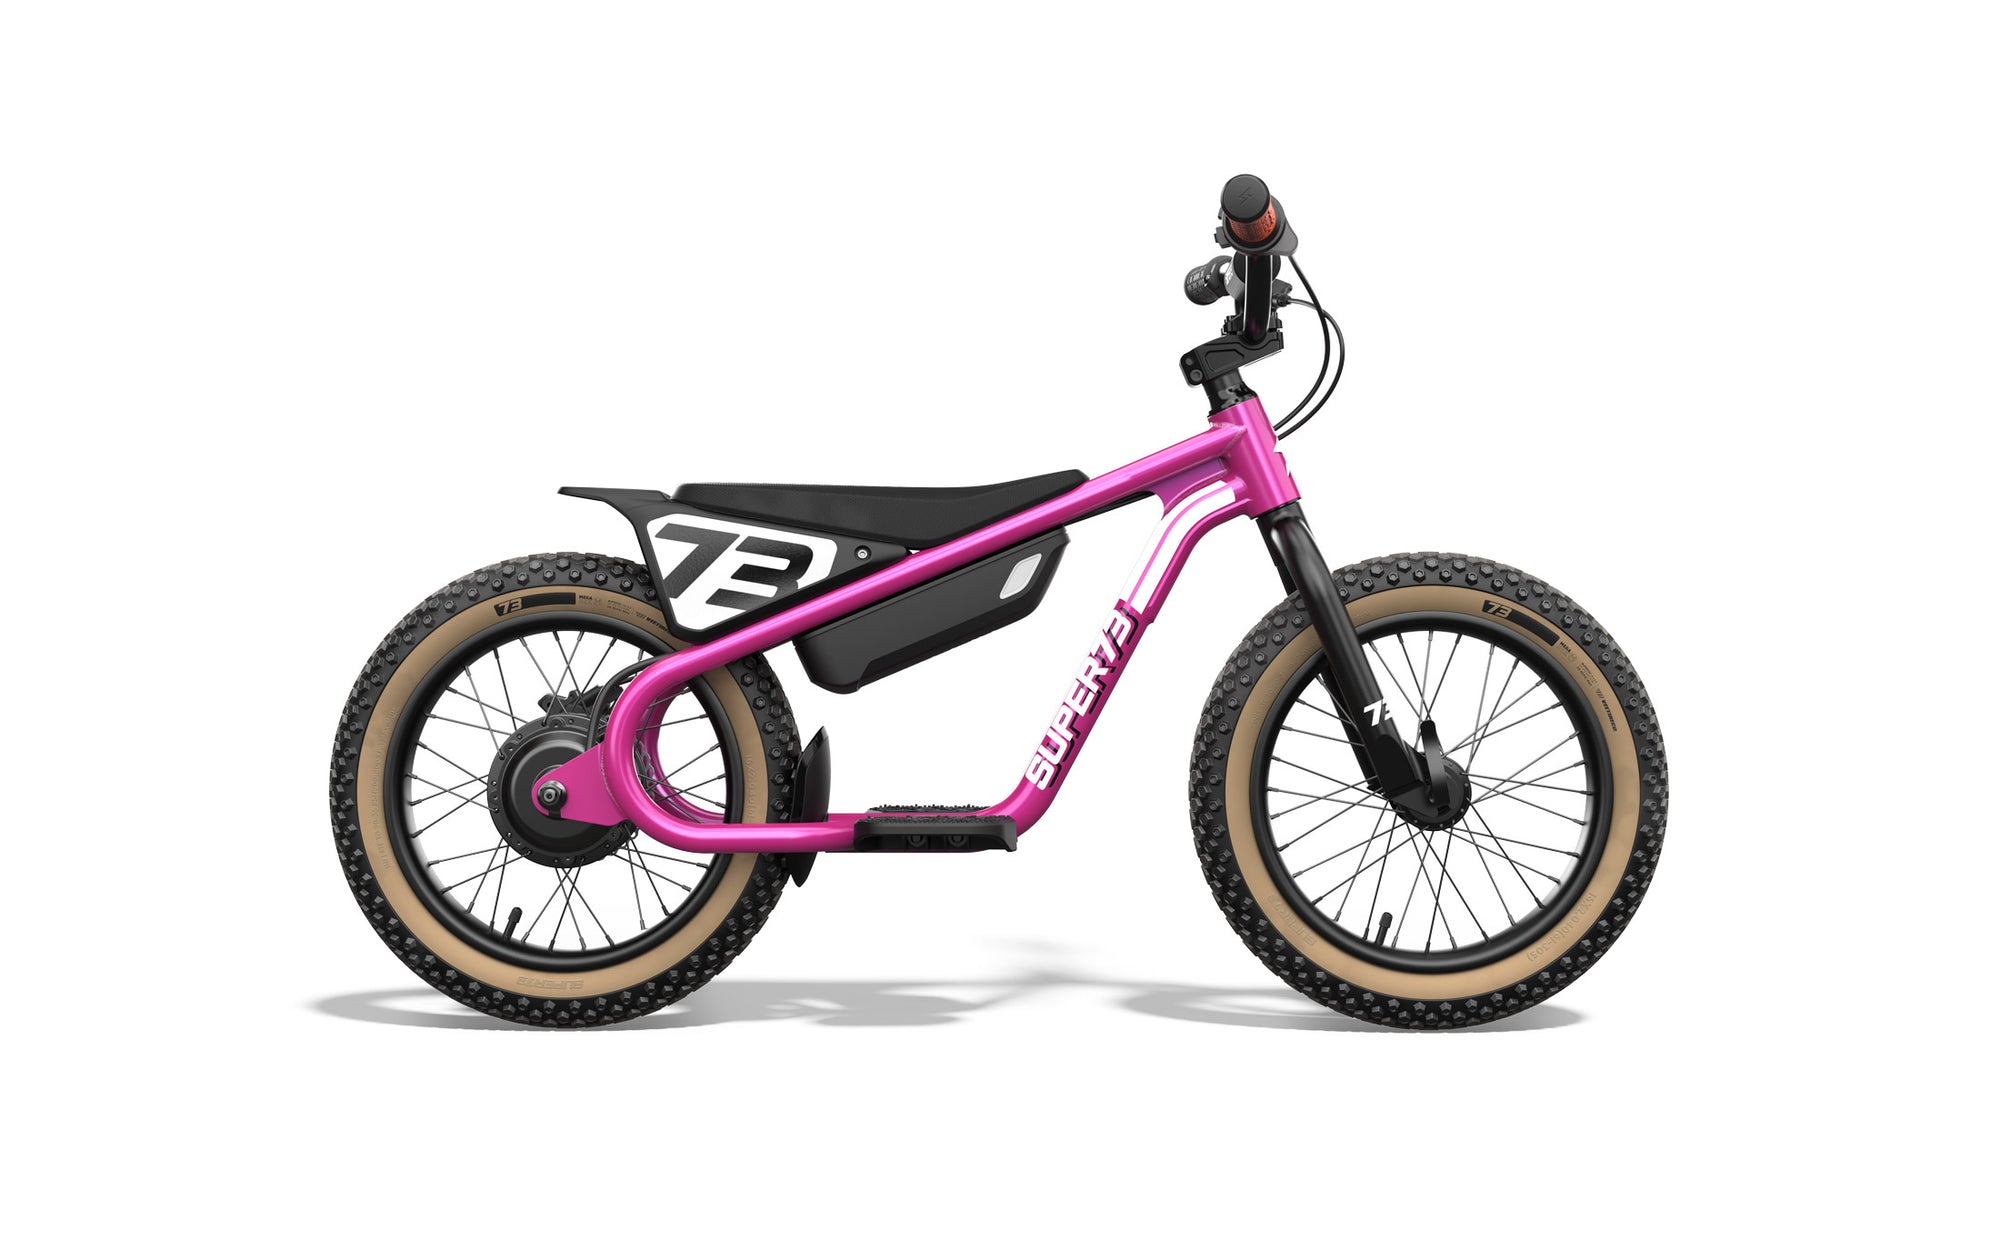 Side view of the Super73-K1D in pink